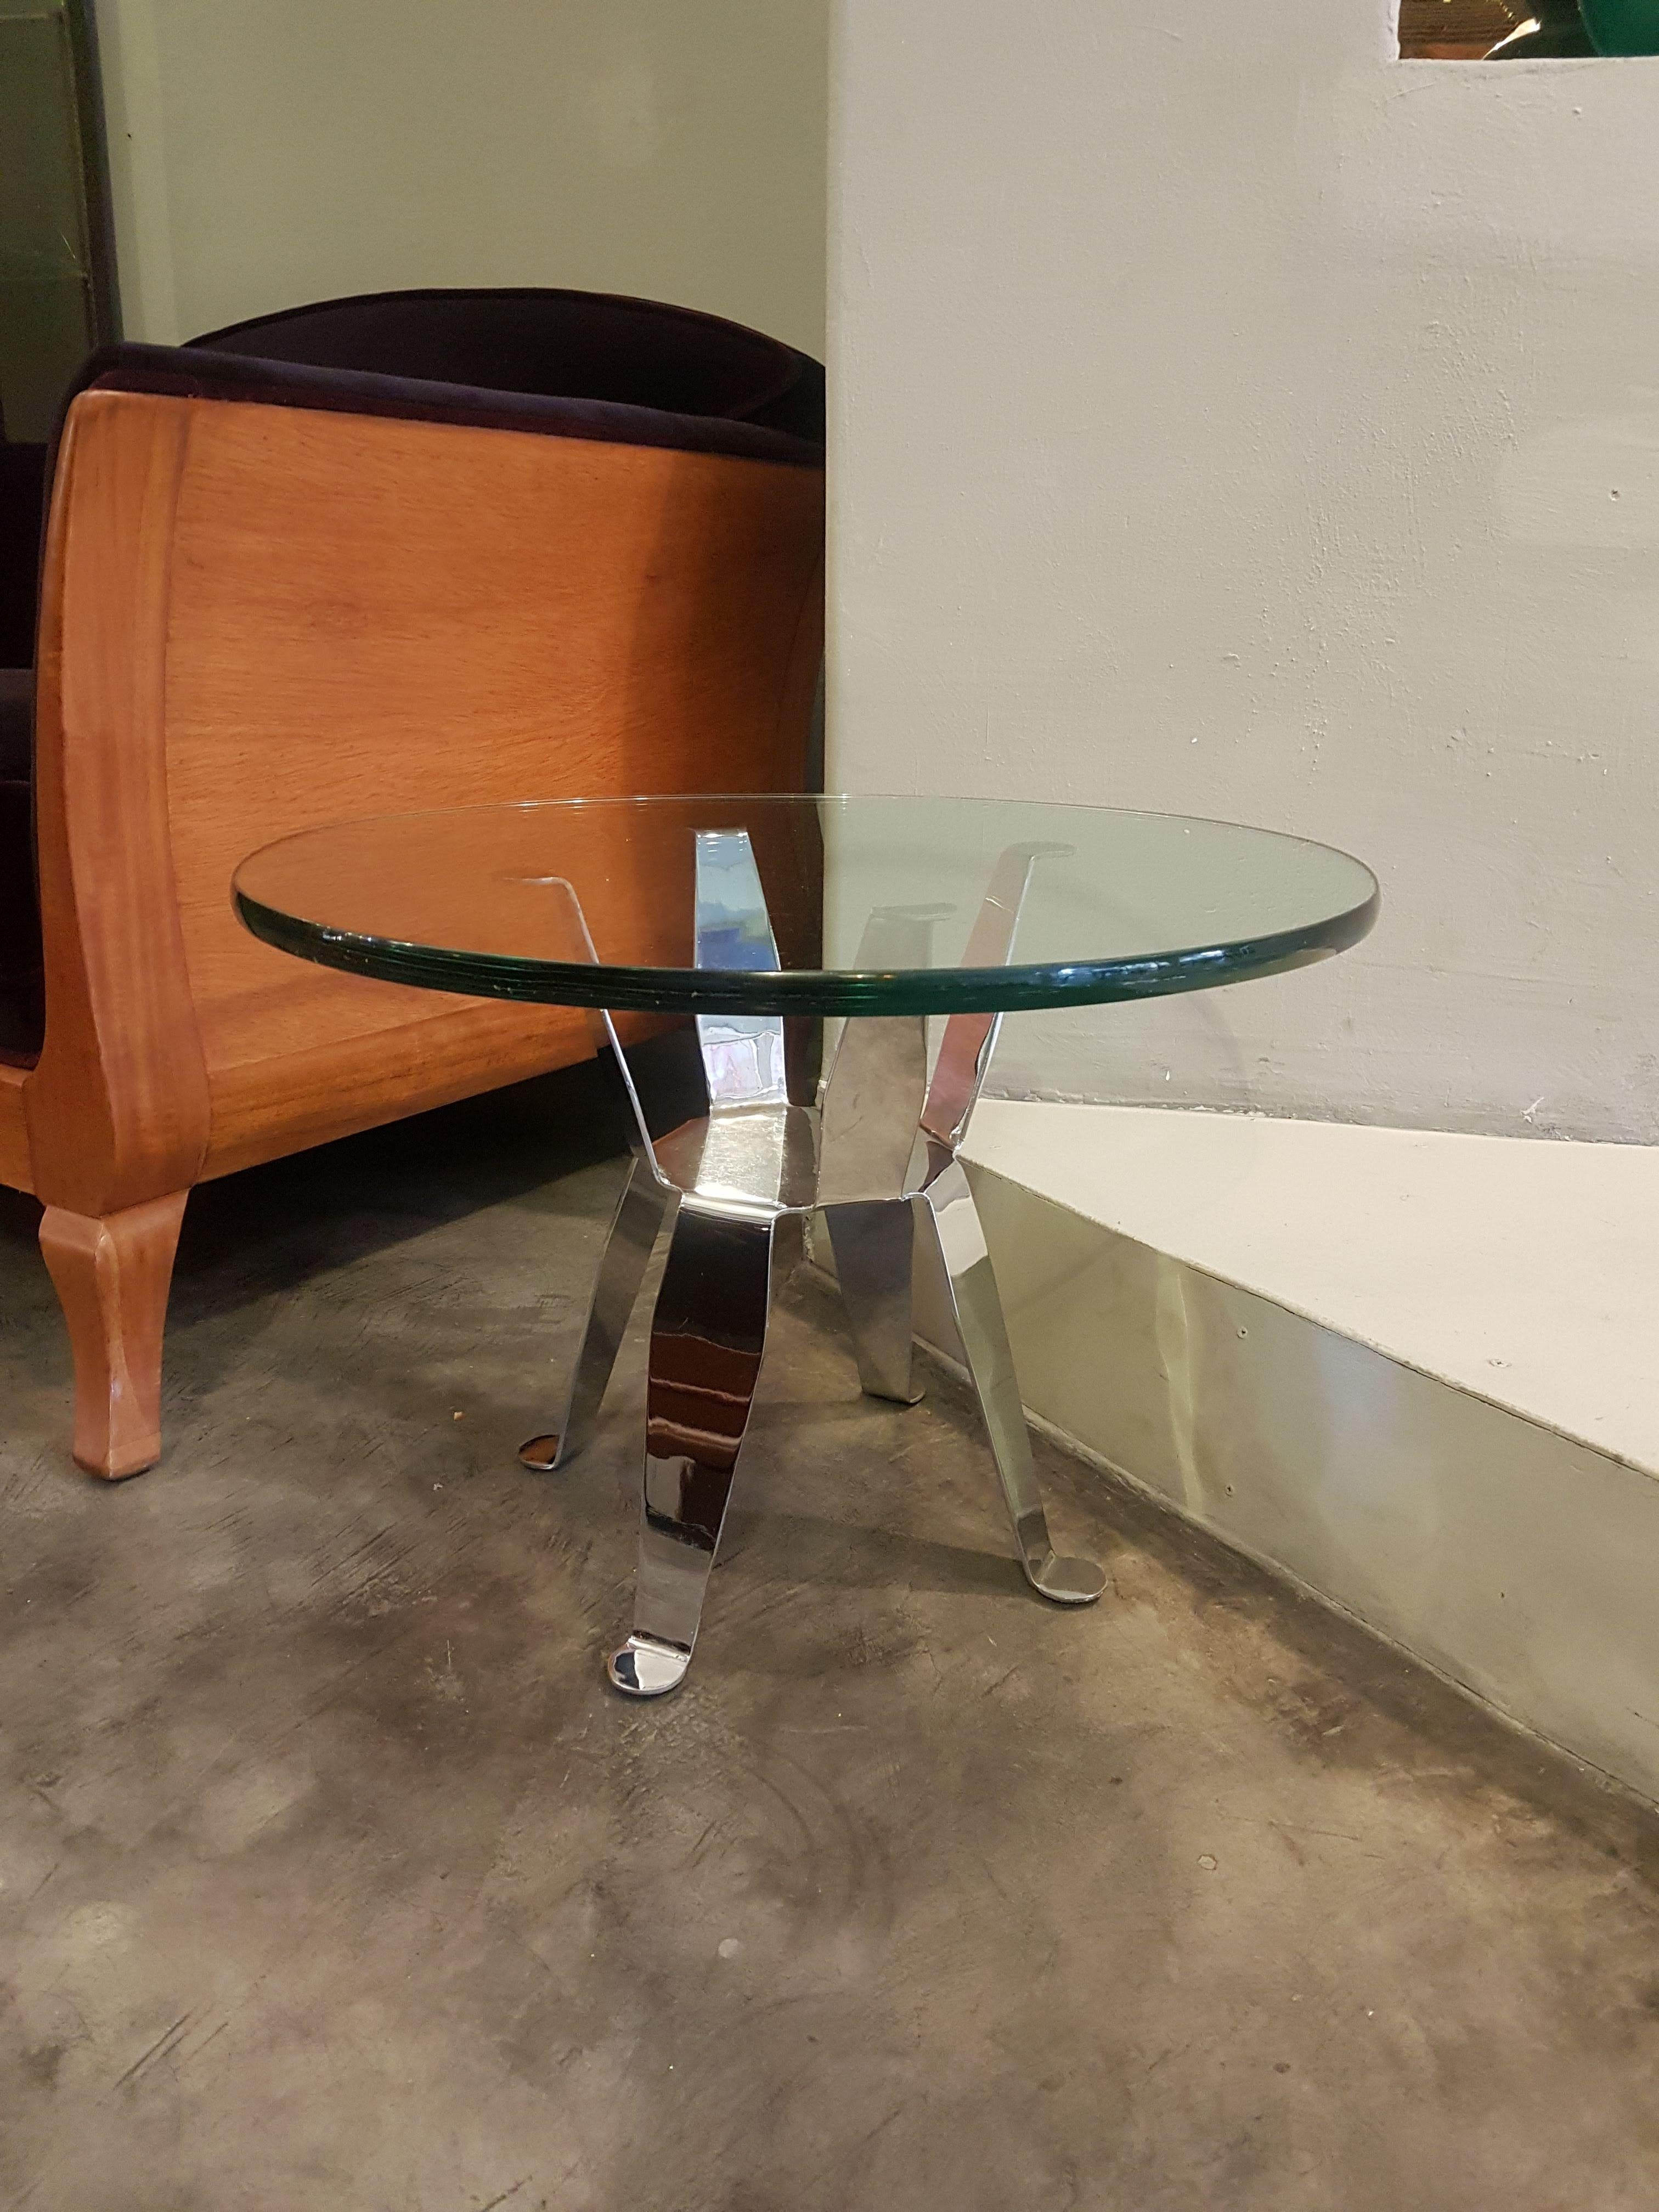 Important Pedro Ramírez Vázquez bent chromed steel side table with round glass top. 

Pedro Ramírez Vázquez is known as Mexico's most prominent architect. His work includes some of the country's architectural highlights from the second half of the